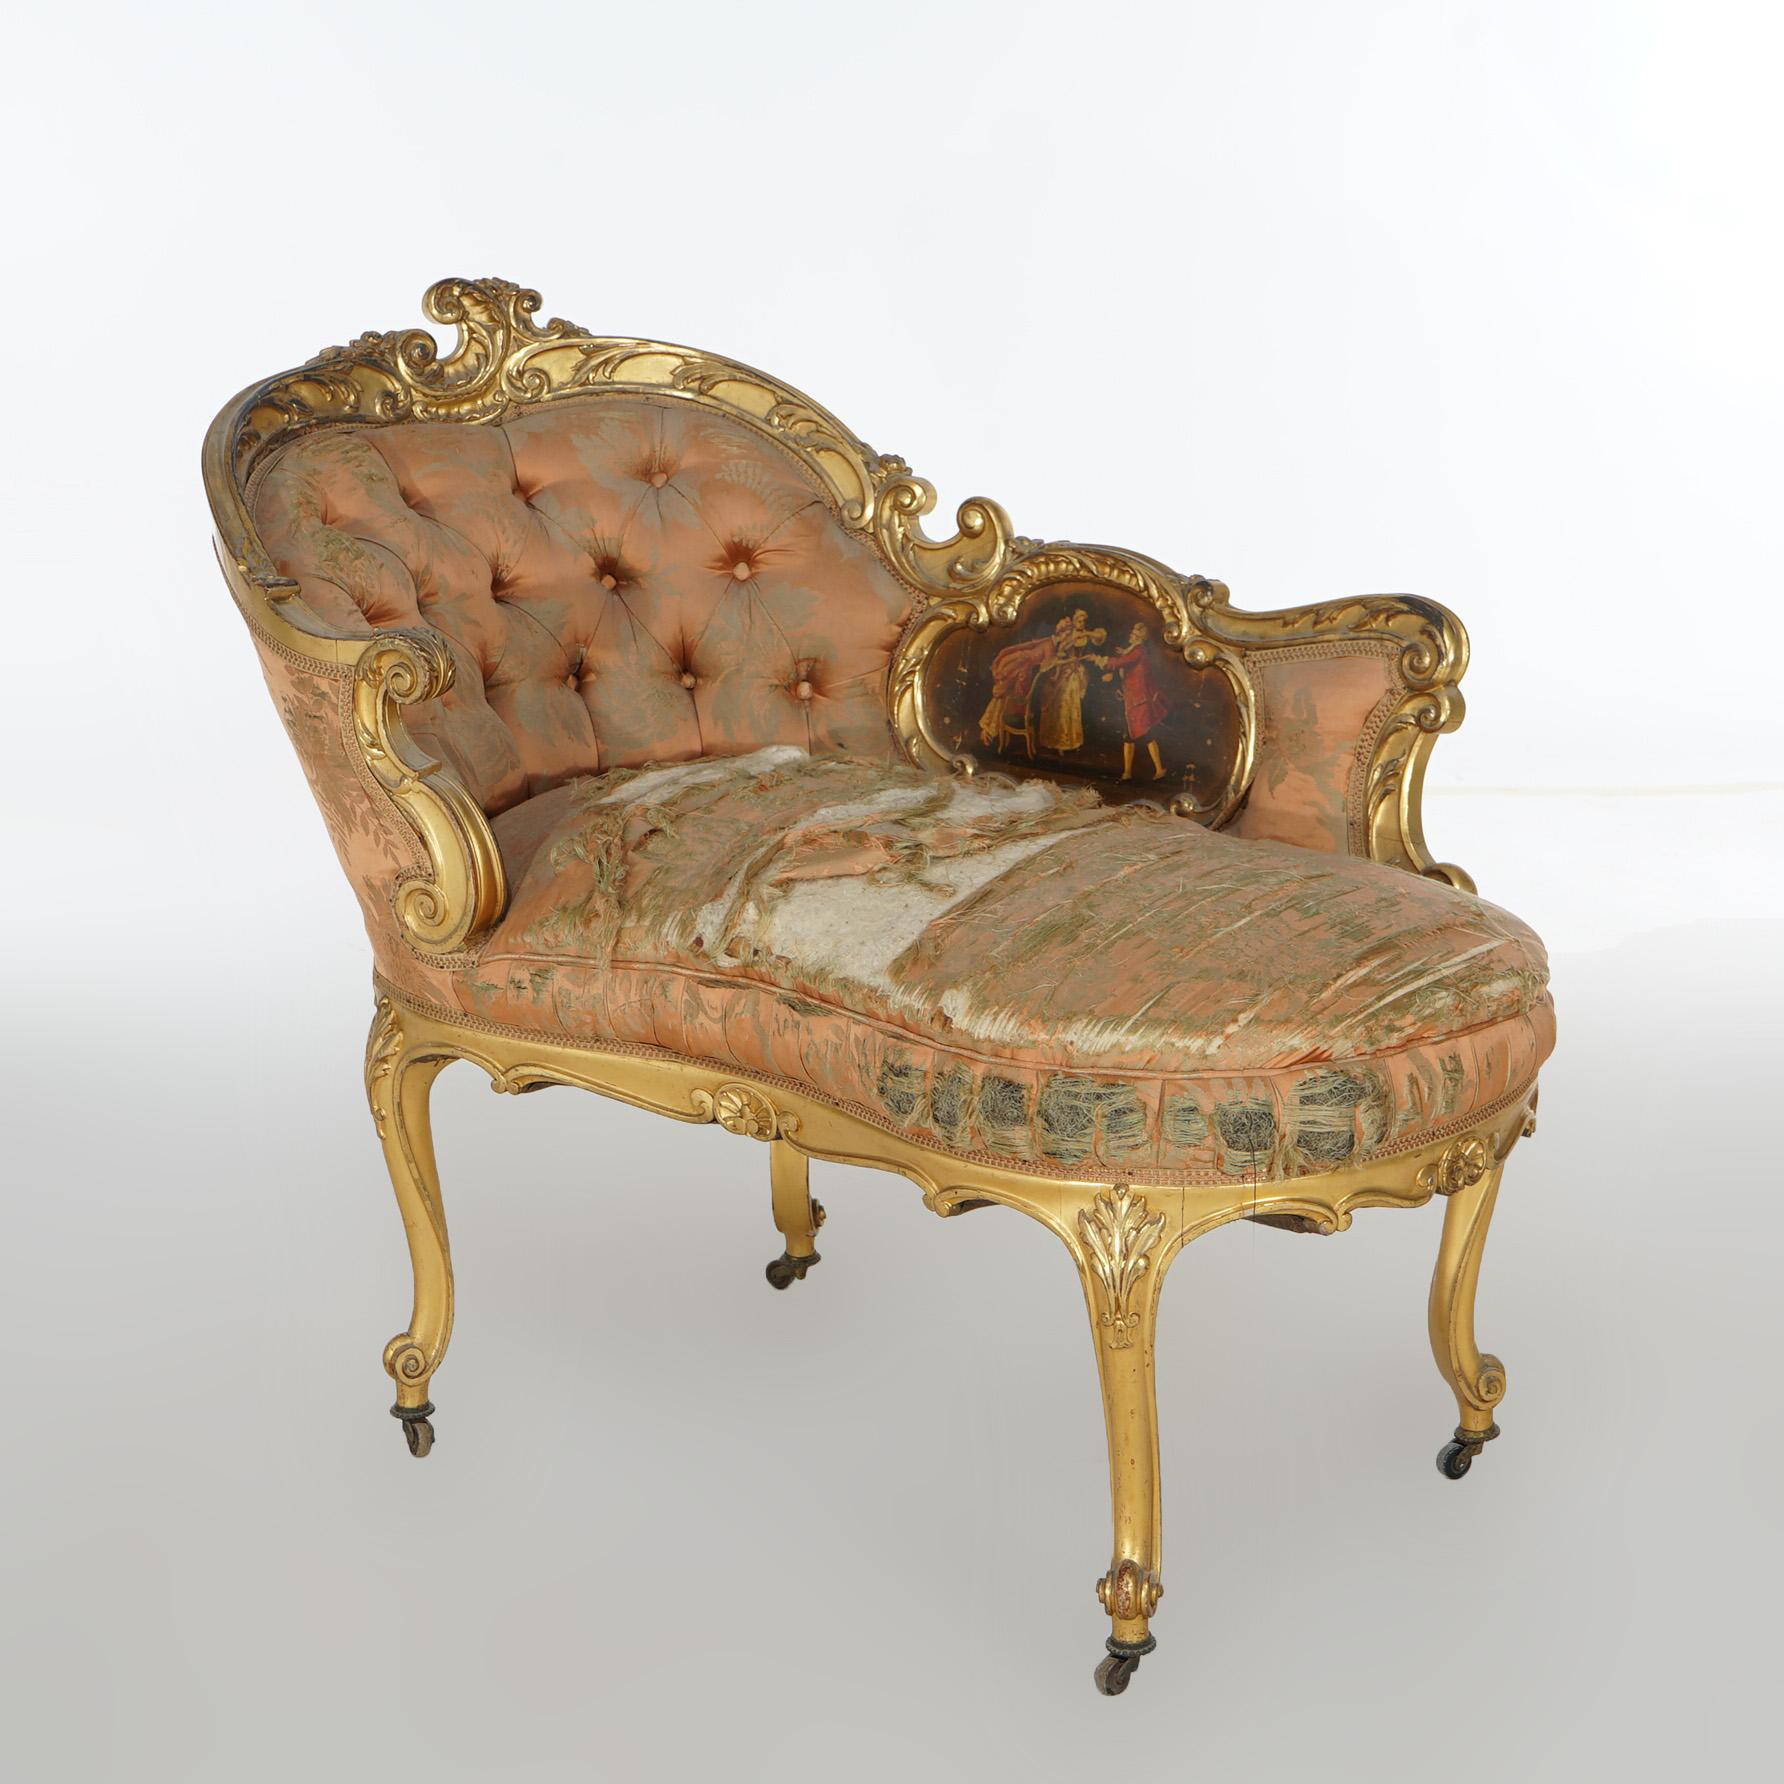 Early Antique French Rococo Vernis Martin & Giltwood Half-Recamier Settee 19th C For Sale 9